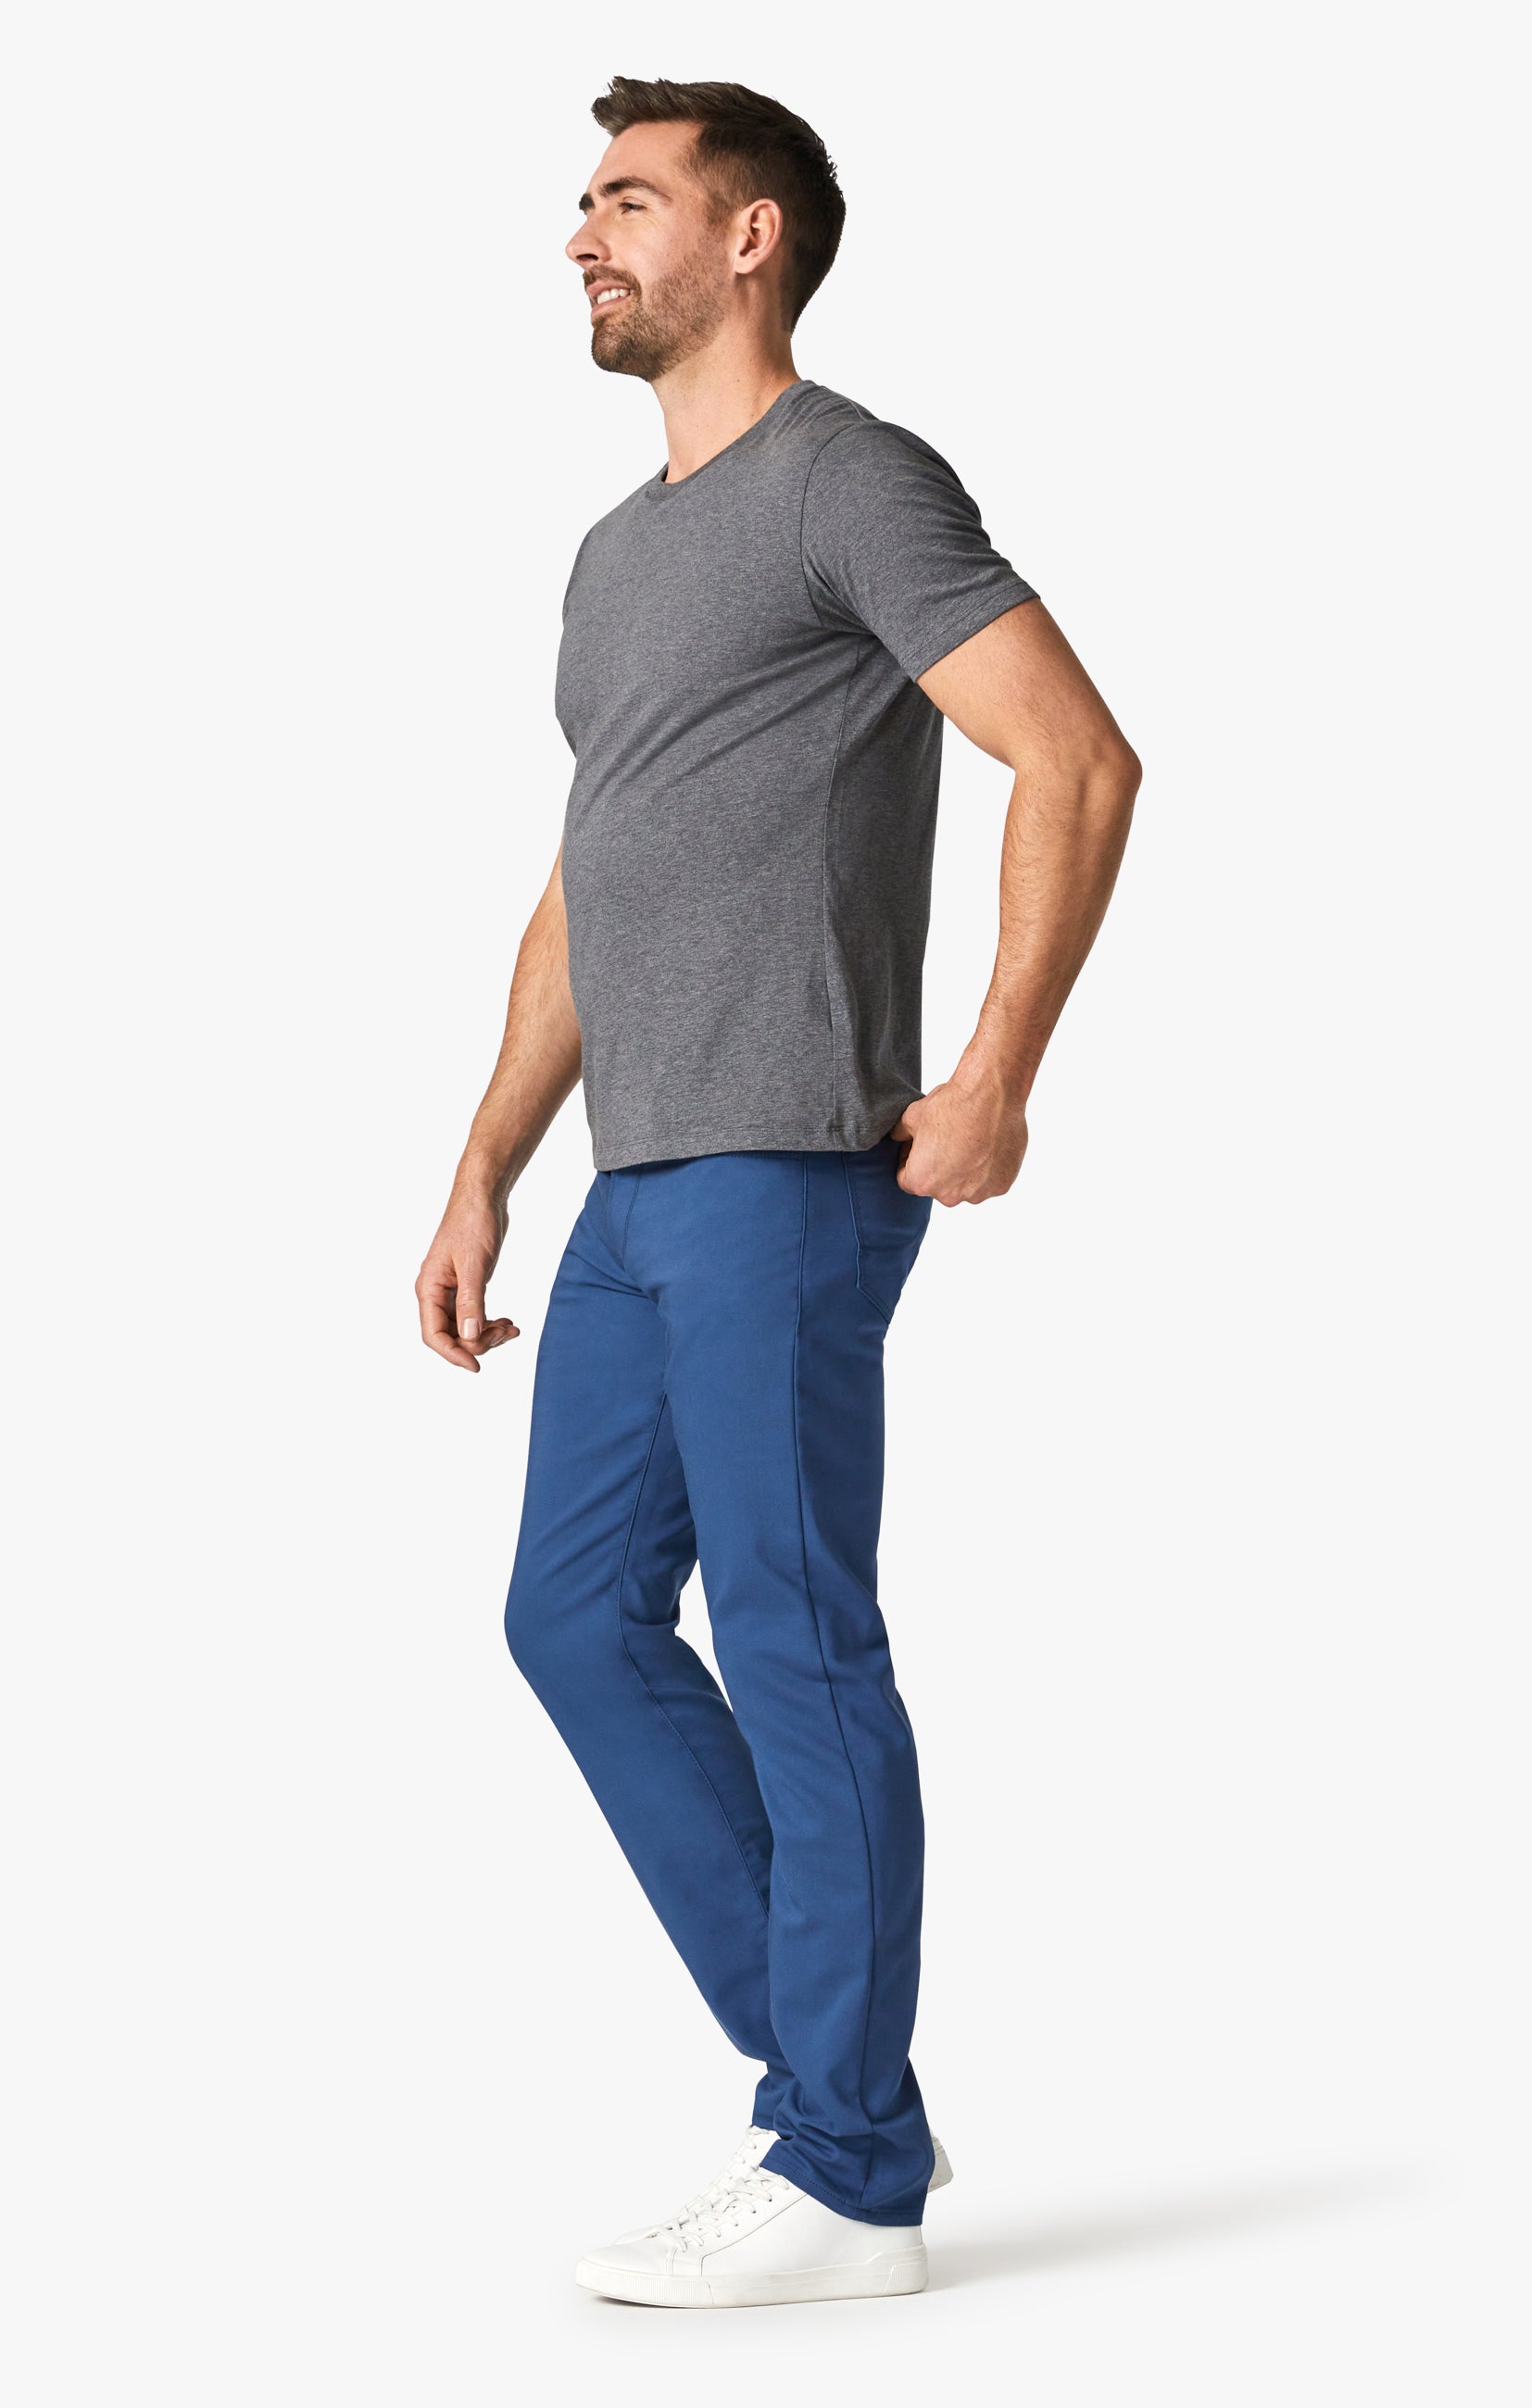 Courage Straight Leg Jeans in Cobalt Commuter Image 10